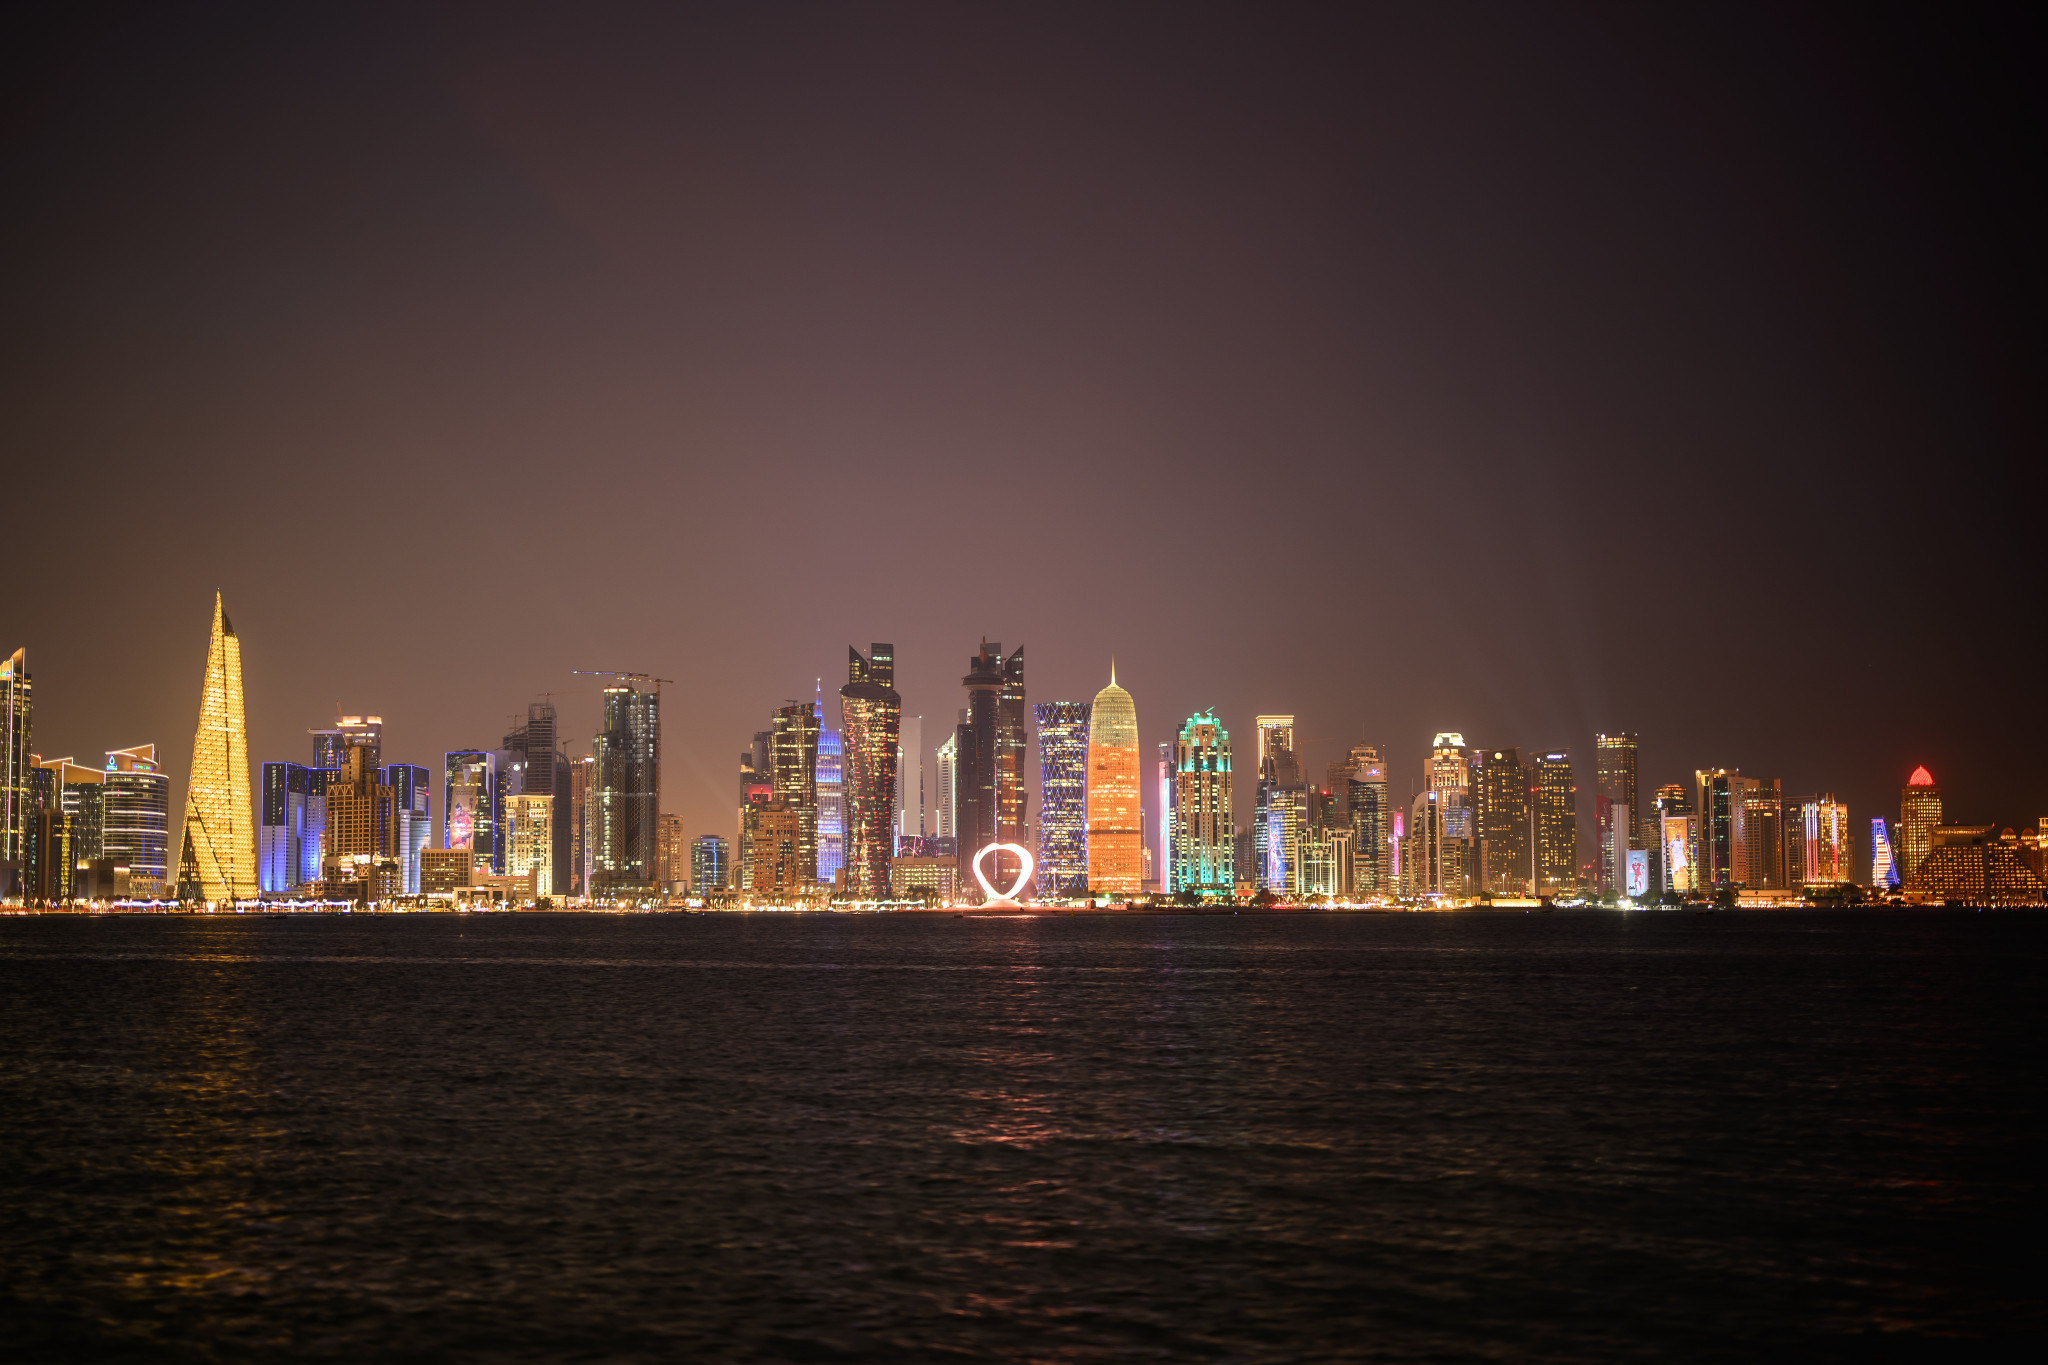 Qatar's capital Doha is set to host the first elite 16 event of the 2023 season and the Beach Pro Tour Finals in December ©Getty Images